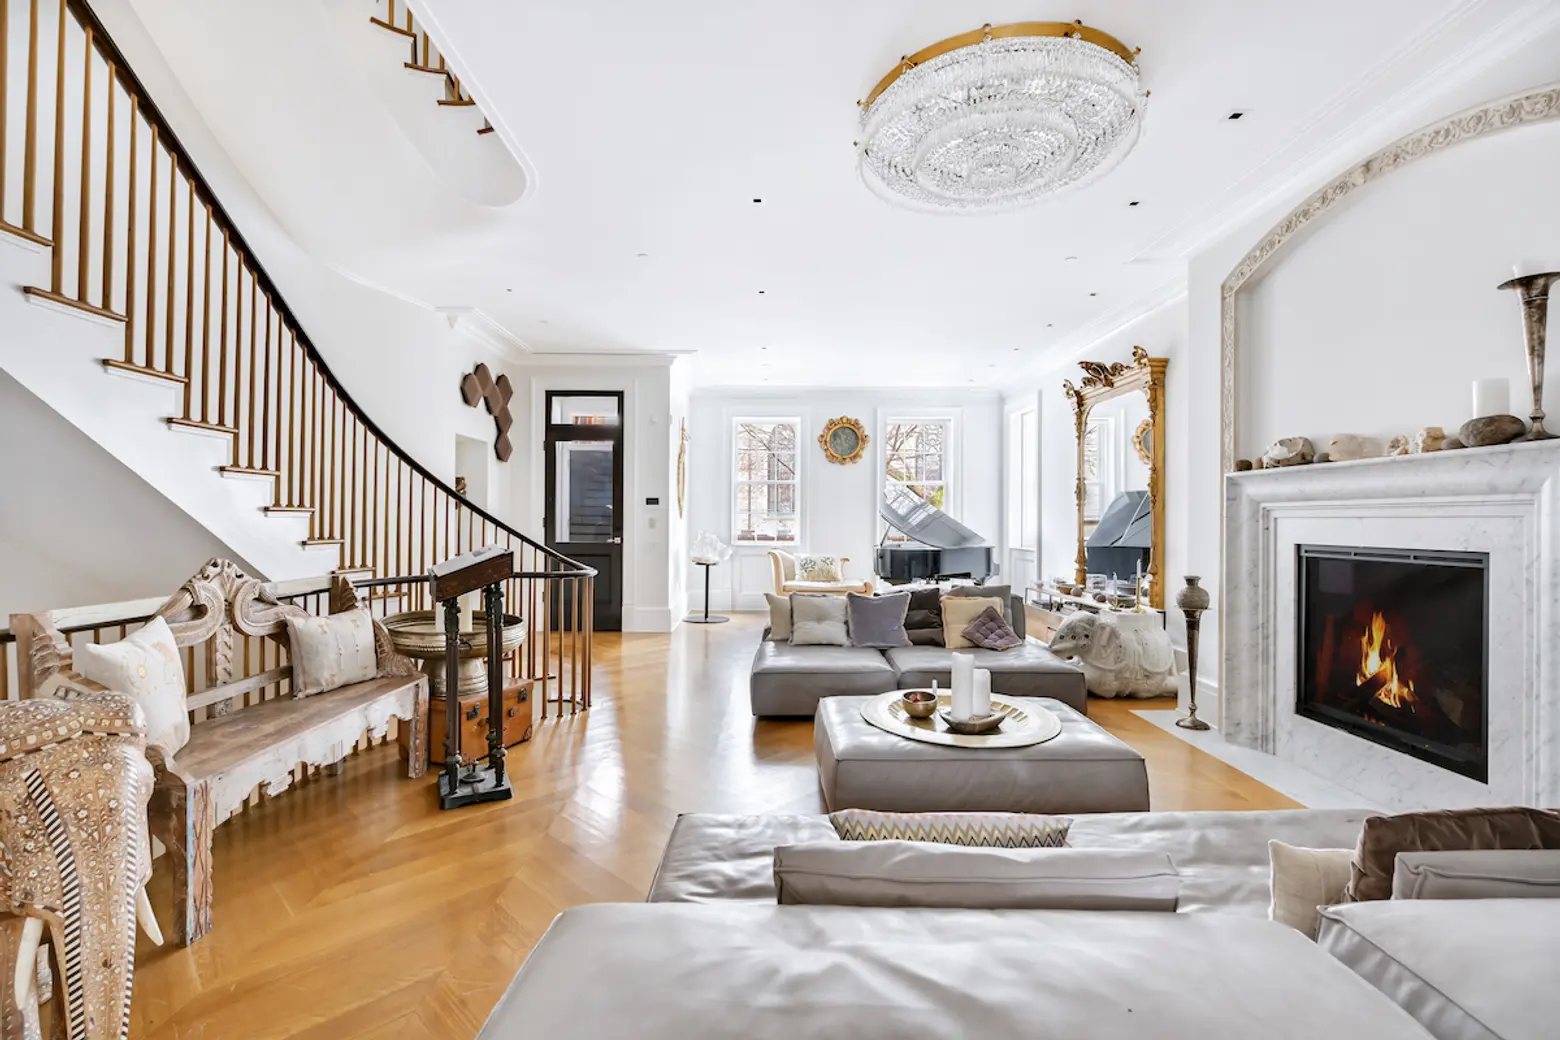 Rent a 9,600-square-foot Nolita mansion in a former convent for $65K a month